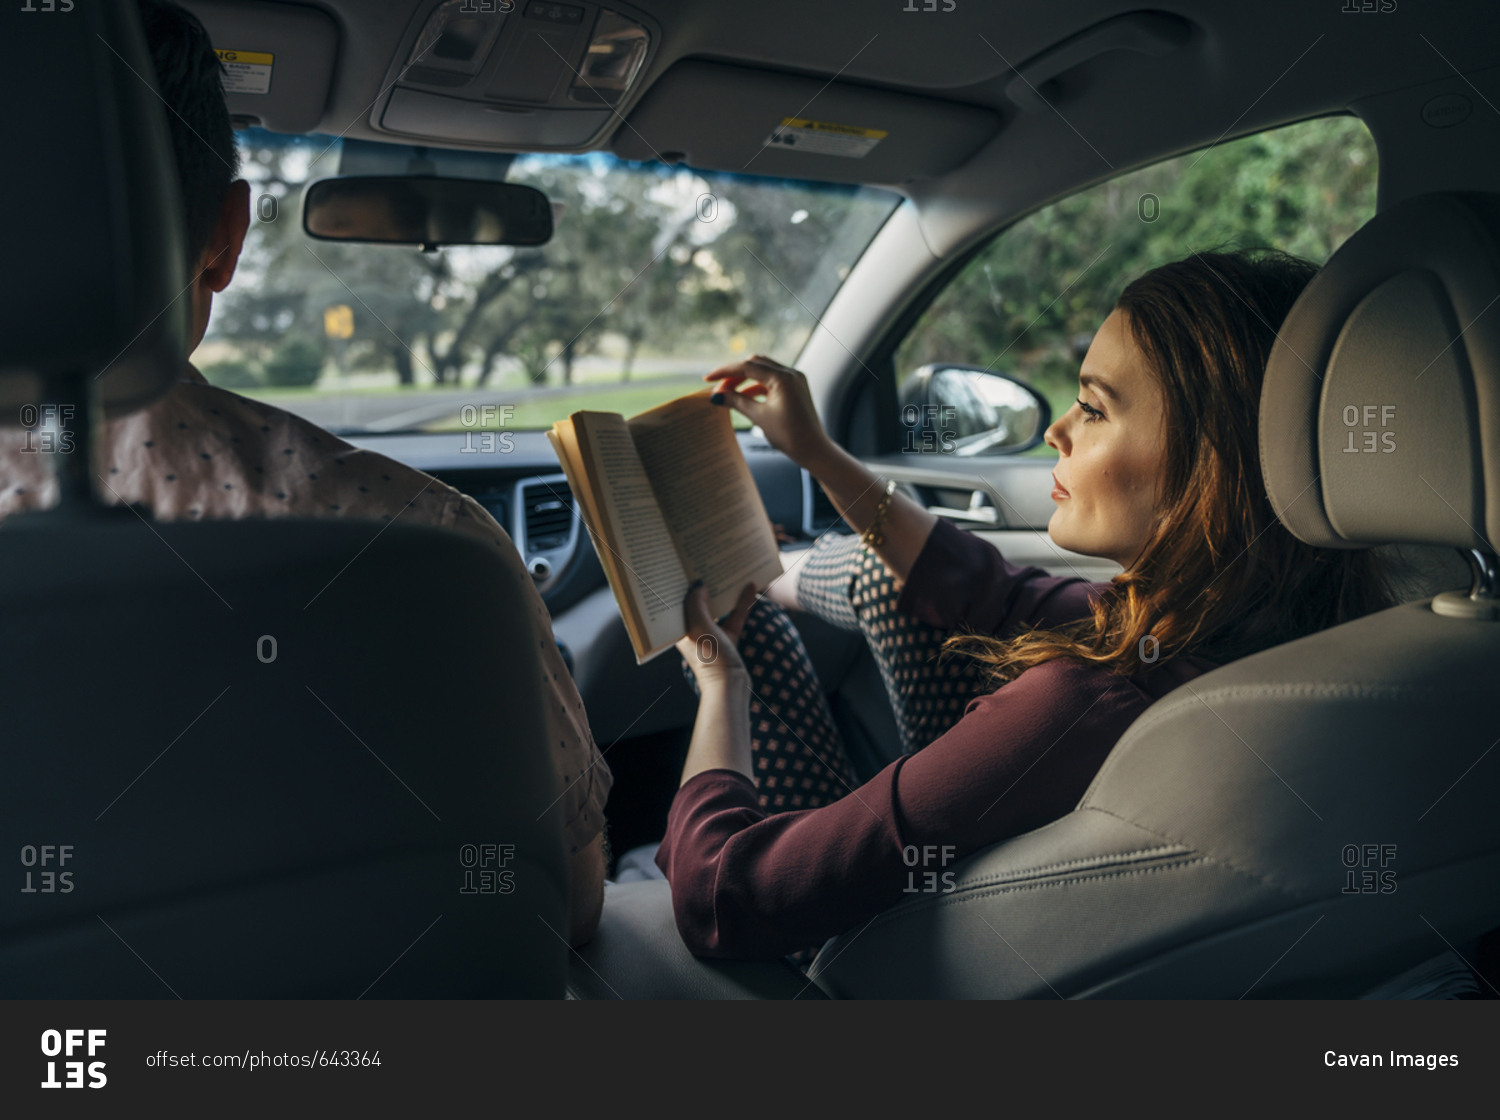 Wife reading book while traveling with husband in car